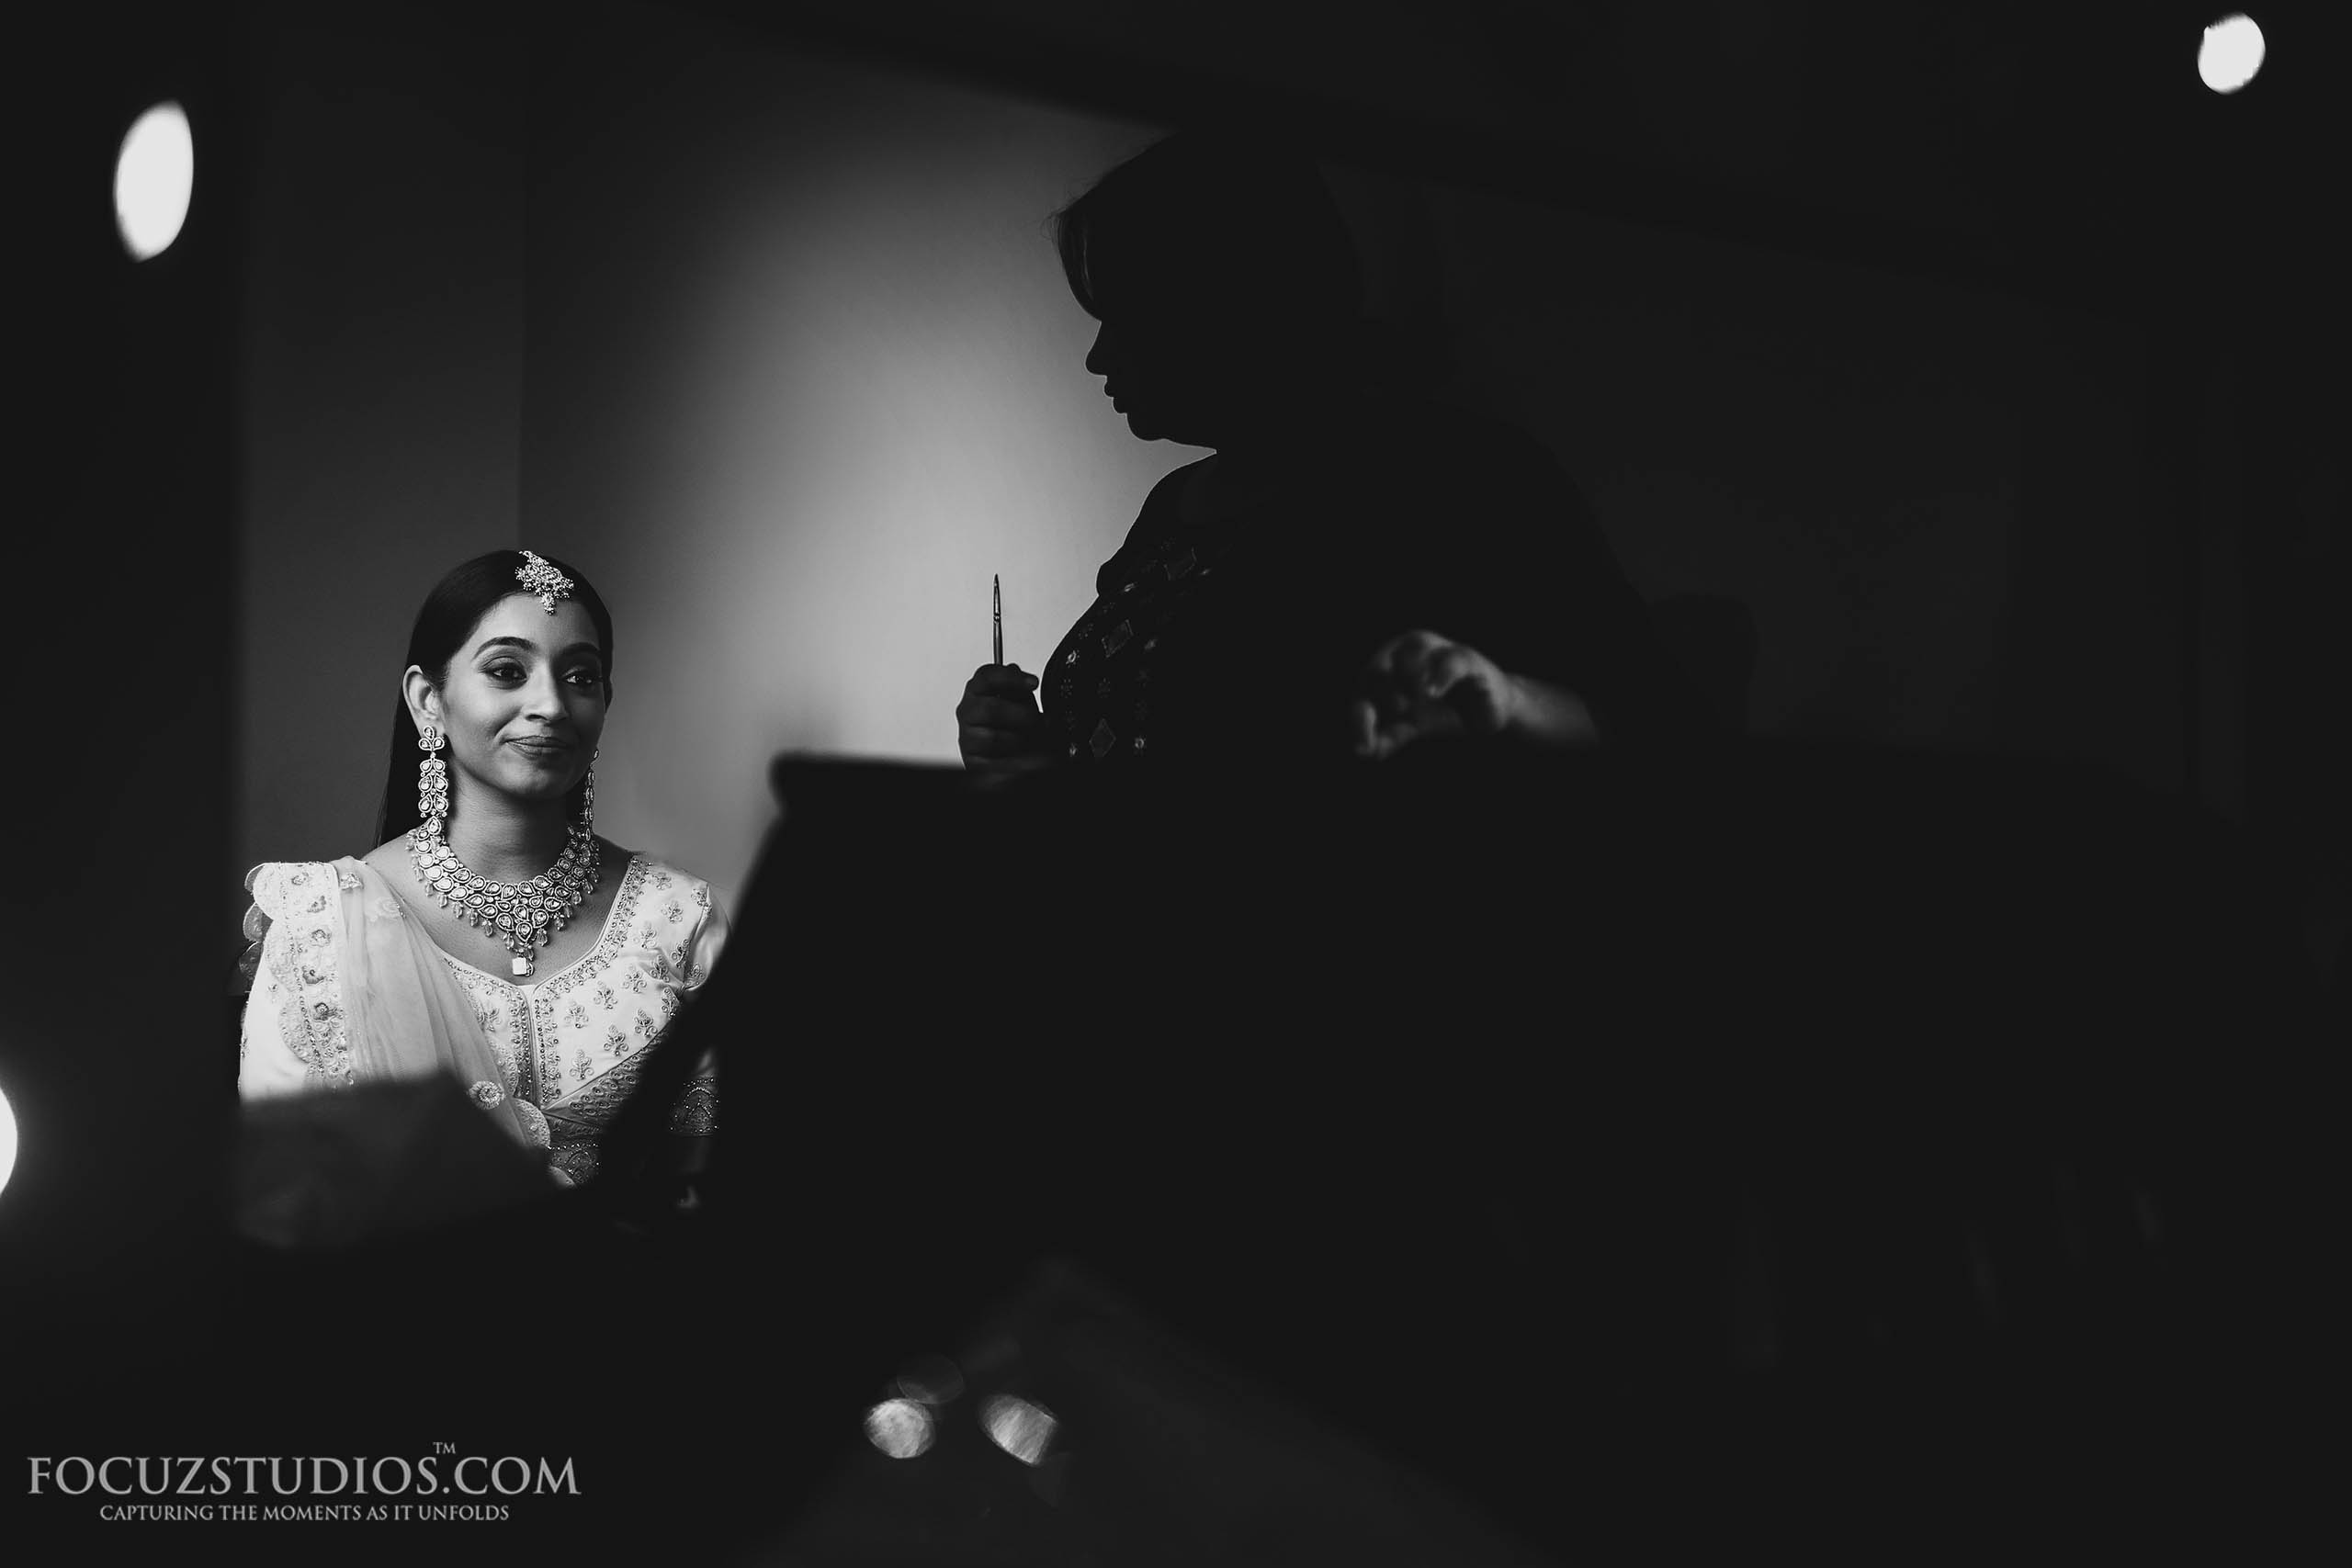 south-indian-bride-getting-ready-candid-wedding-photography-9